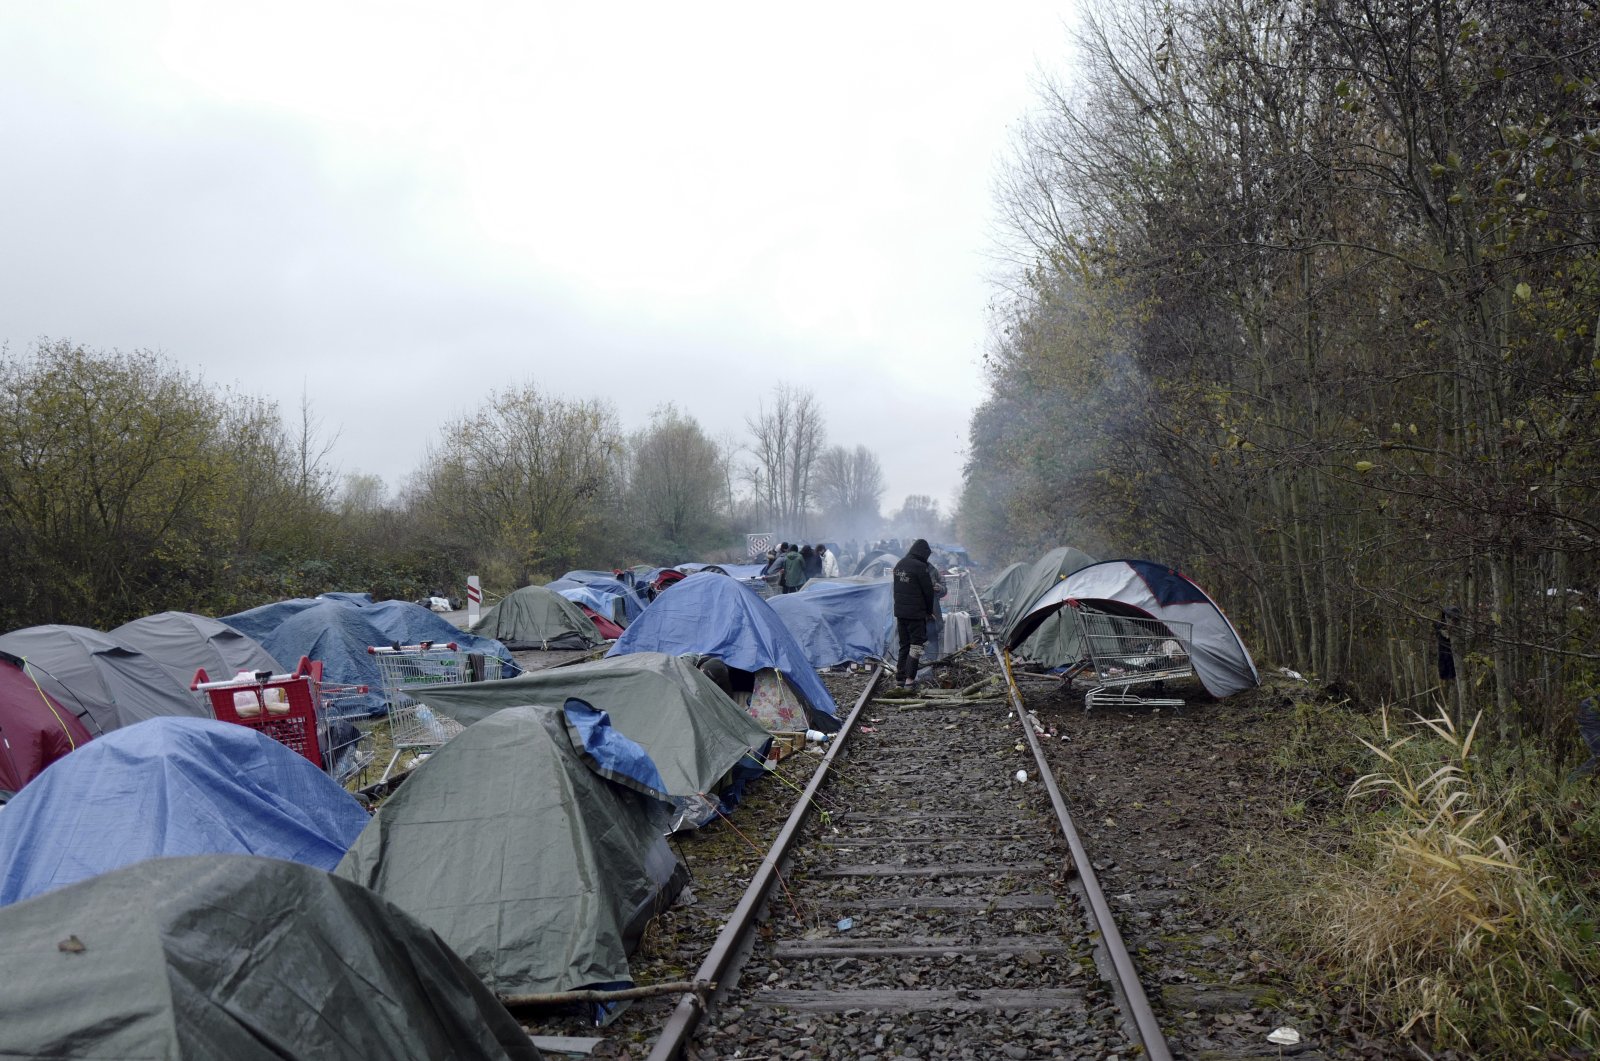 A makeshift migrant camp is set up in Calais, northern France, Nov. 27, 2021. (AP Photo)